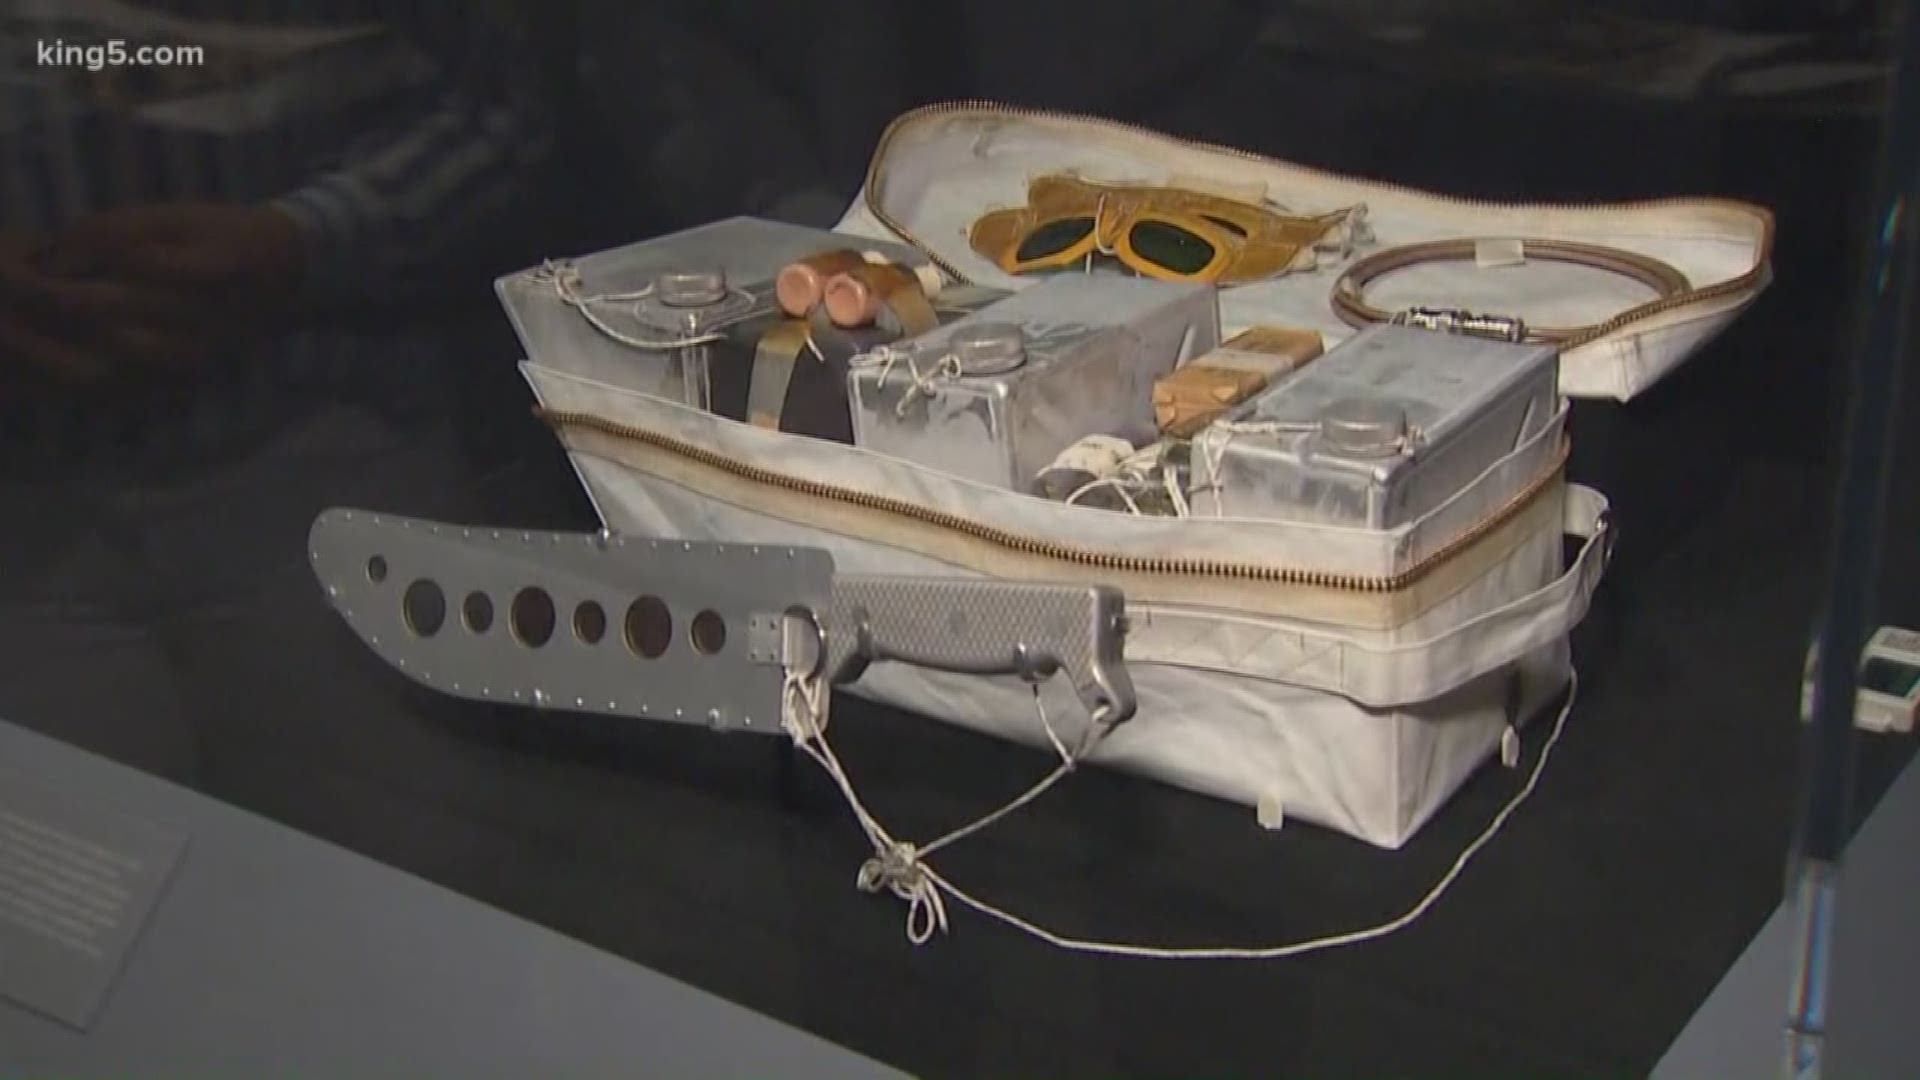 The Museum of Flight in Seattle celebrates the 50th anniversary of the Apollo 11 Mission and humankind's first steps on the moon.